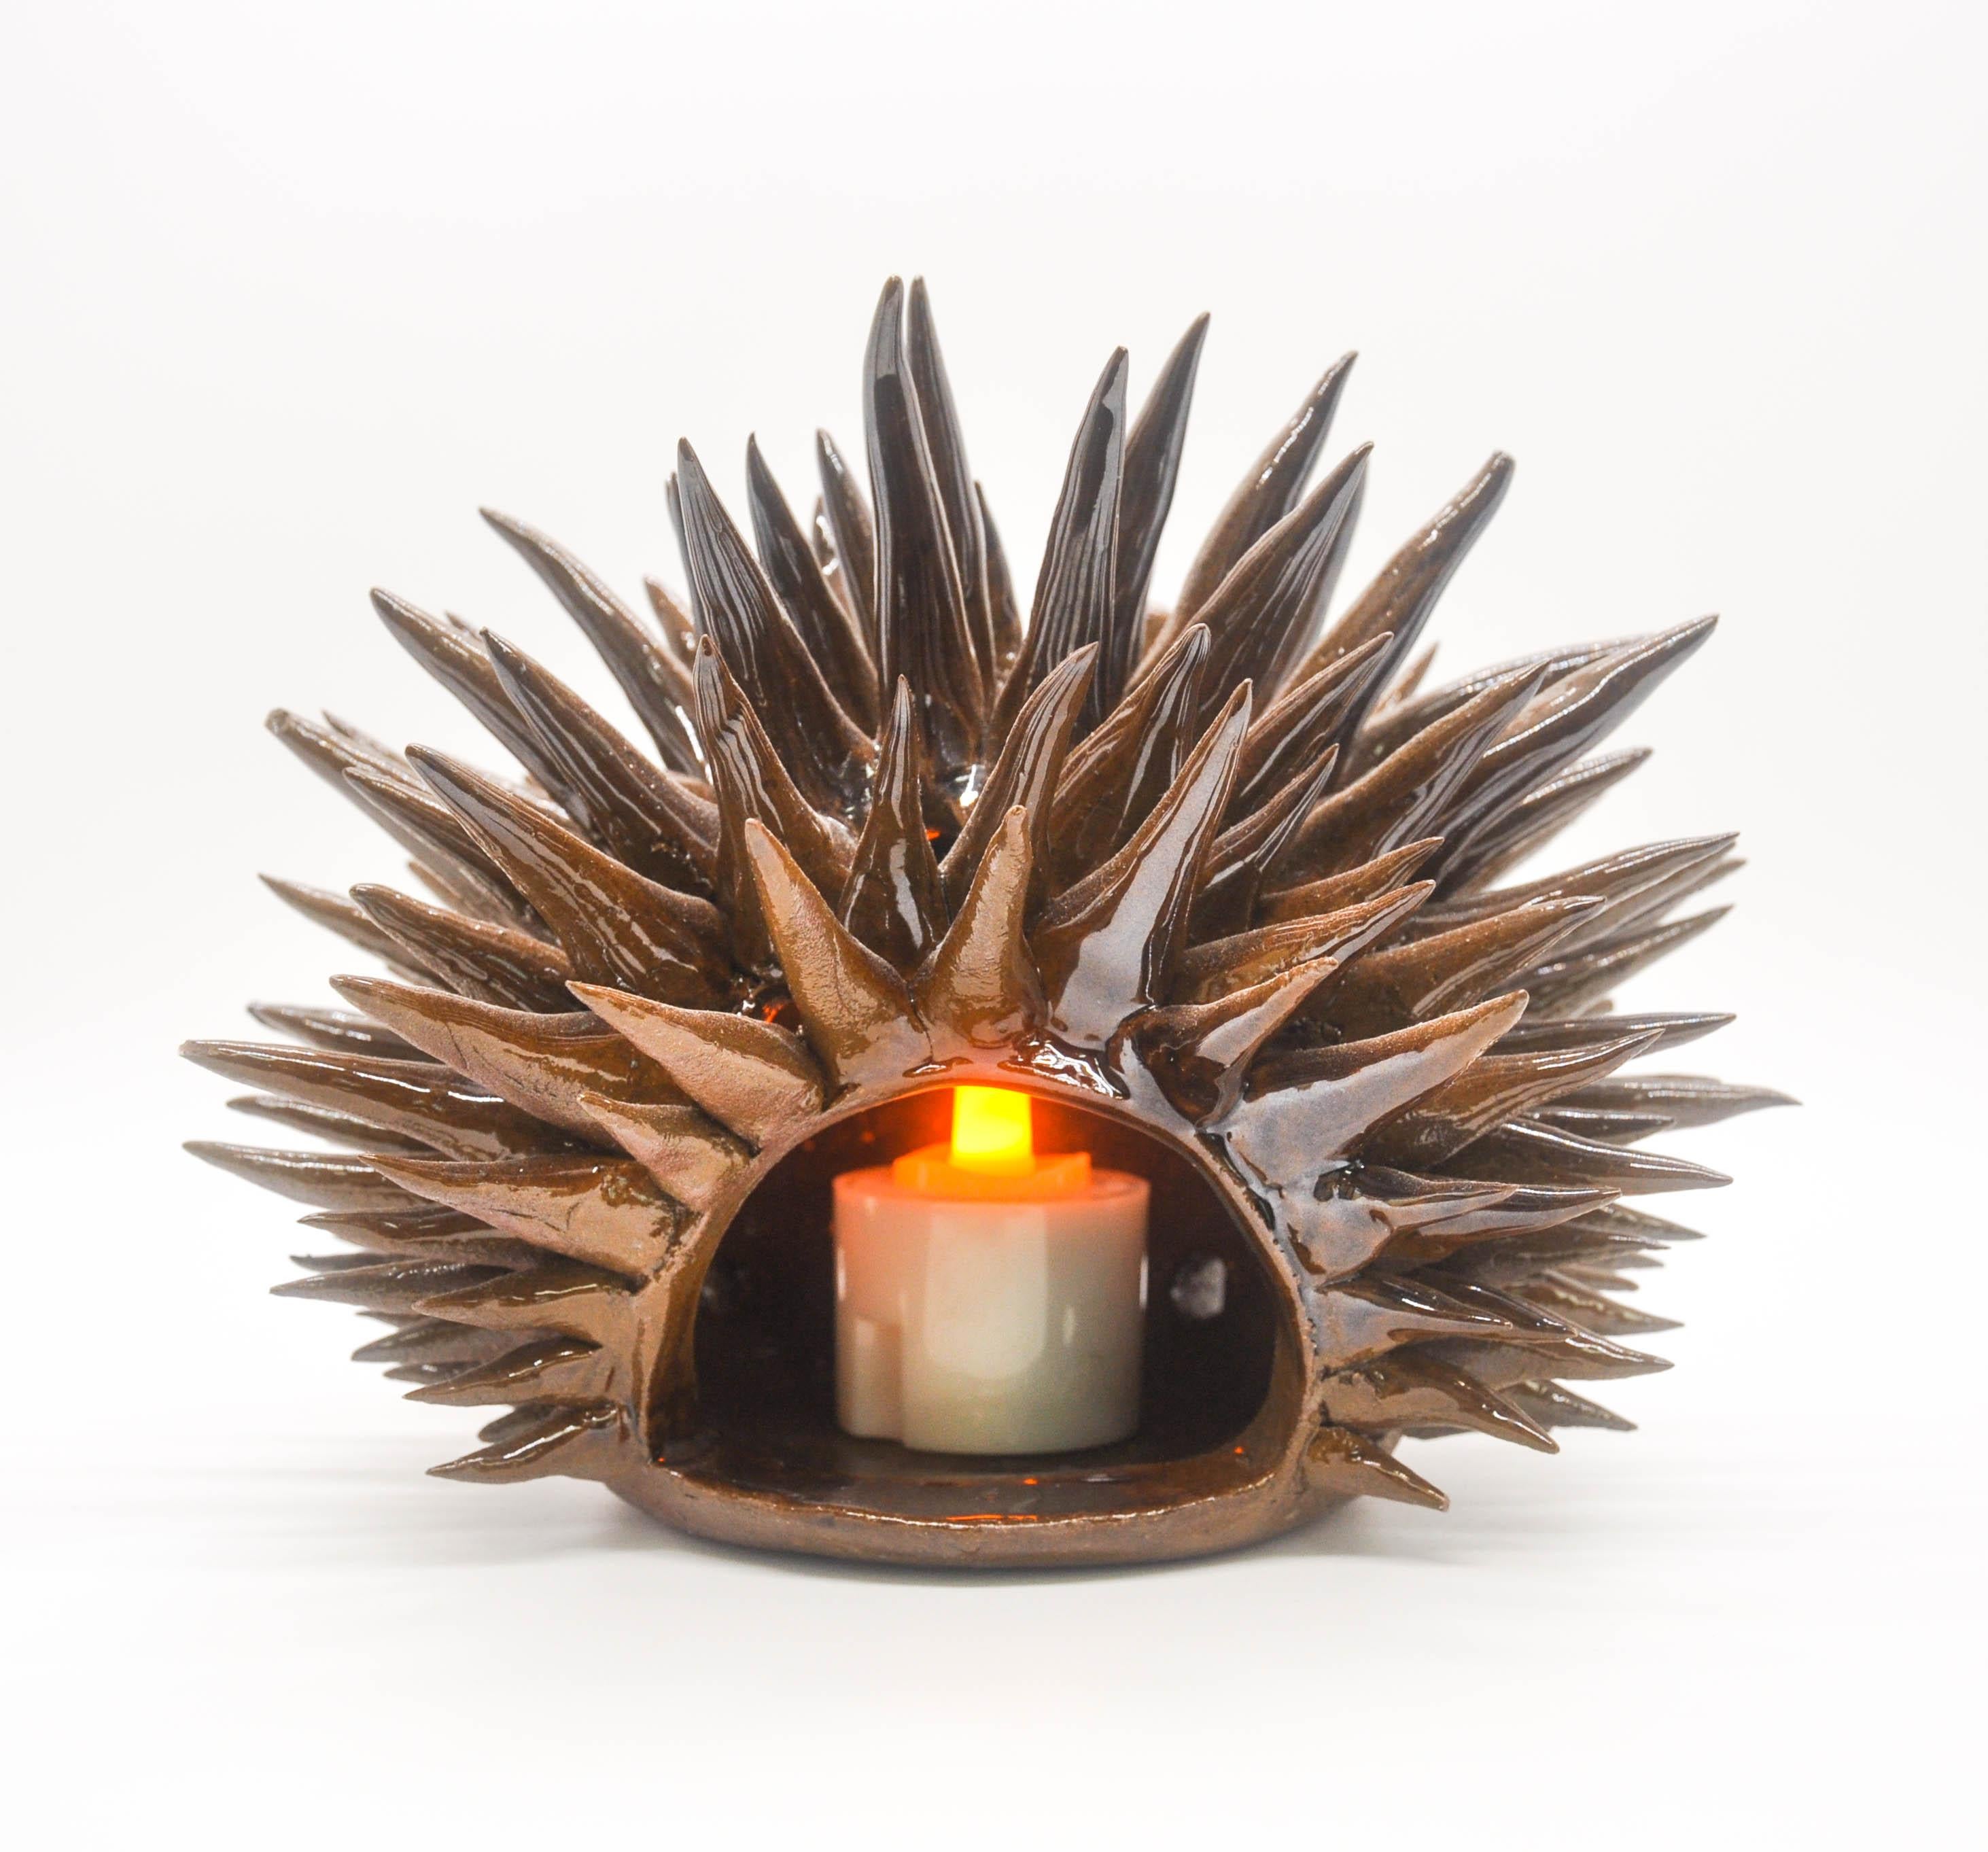 This whimsical candlelight Urchin is from our 2022 Urchin Collection. When lit, the hidden peepholes in its body allow light from within to shine through.

Each urchin is hand-sculpted with spikes that are individually rolled and attached, then